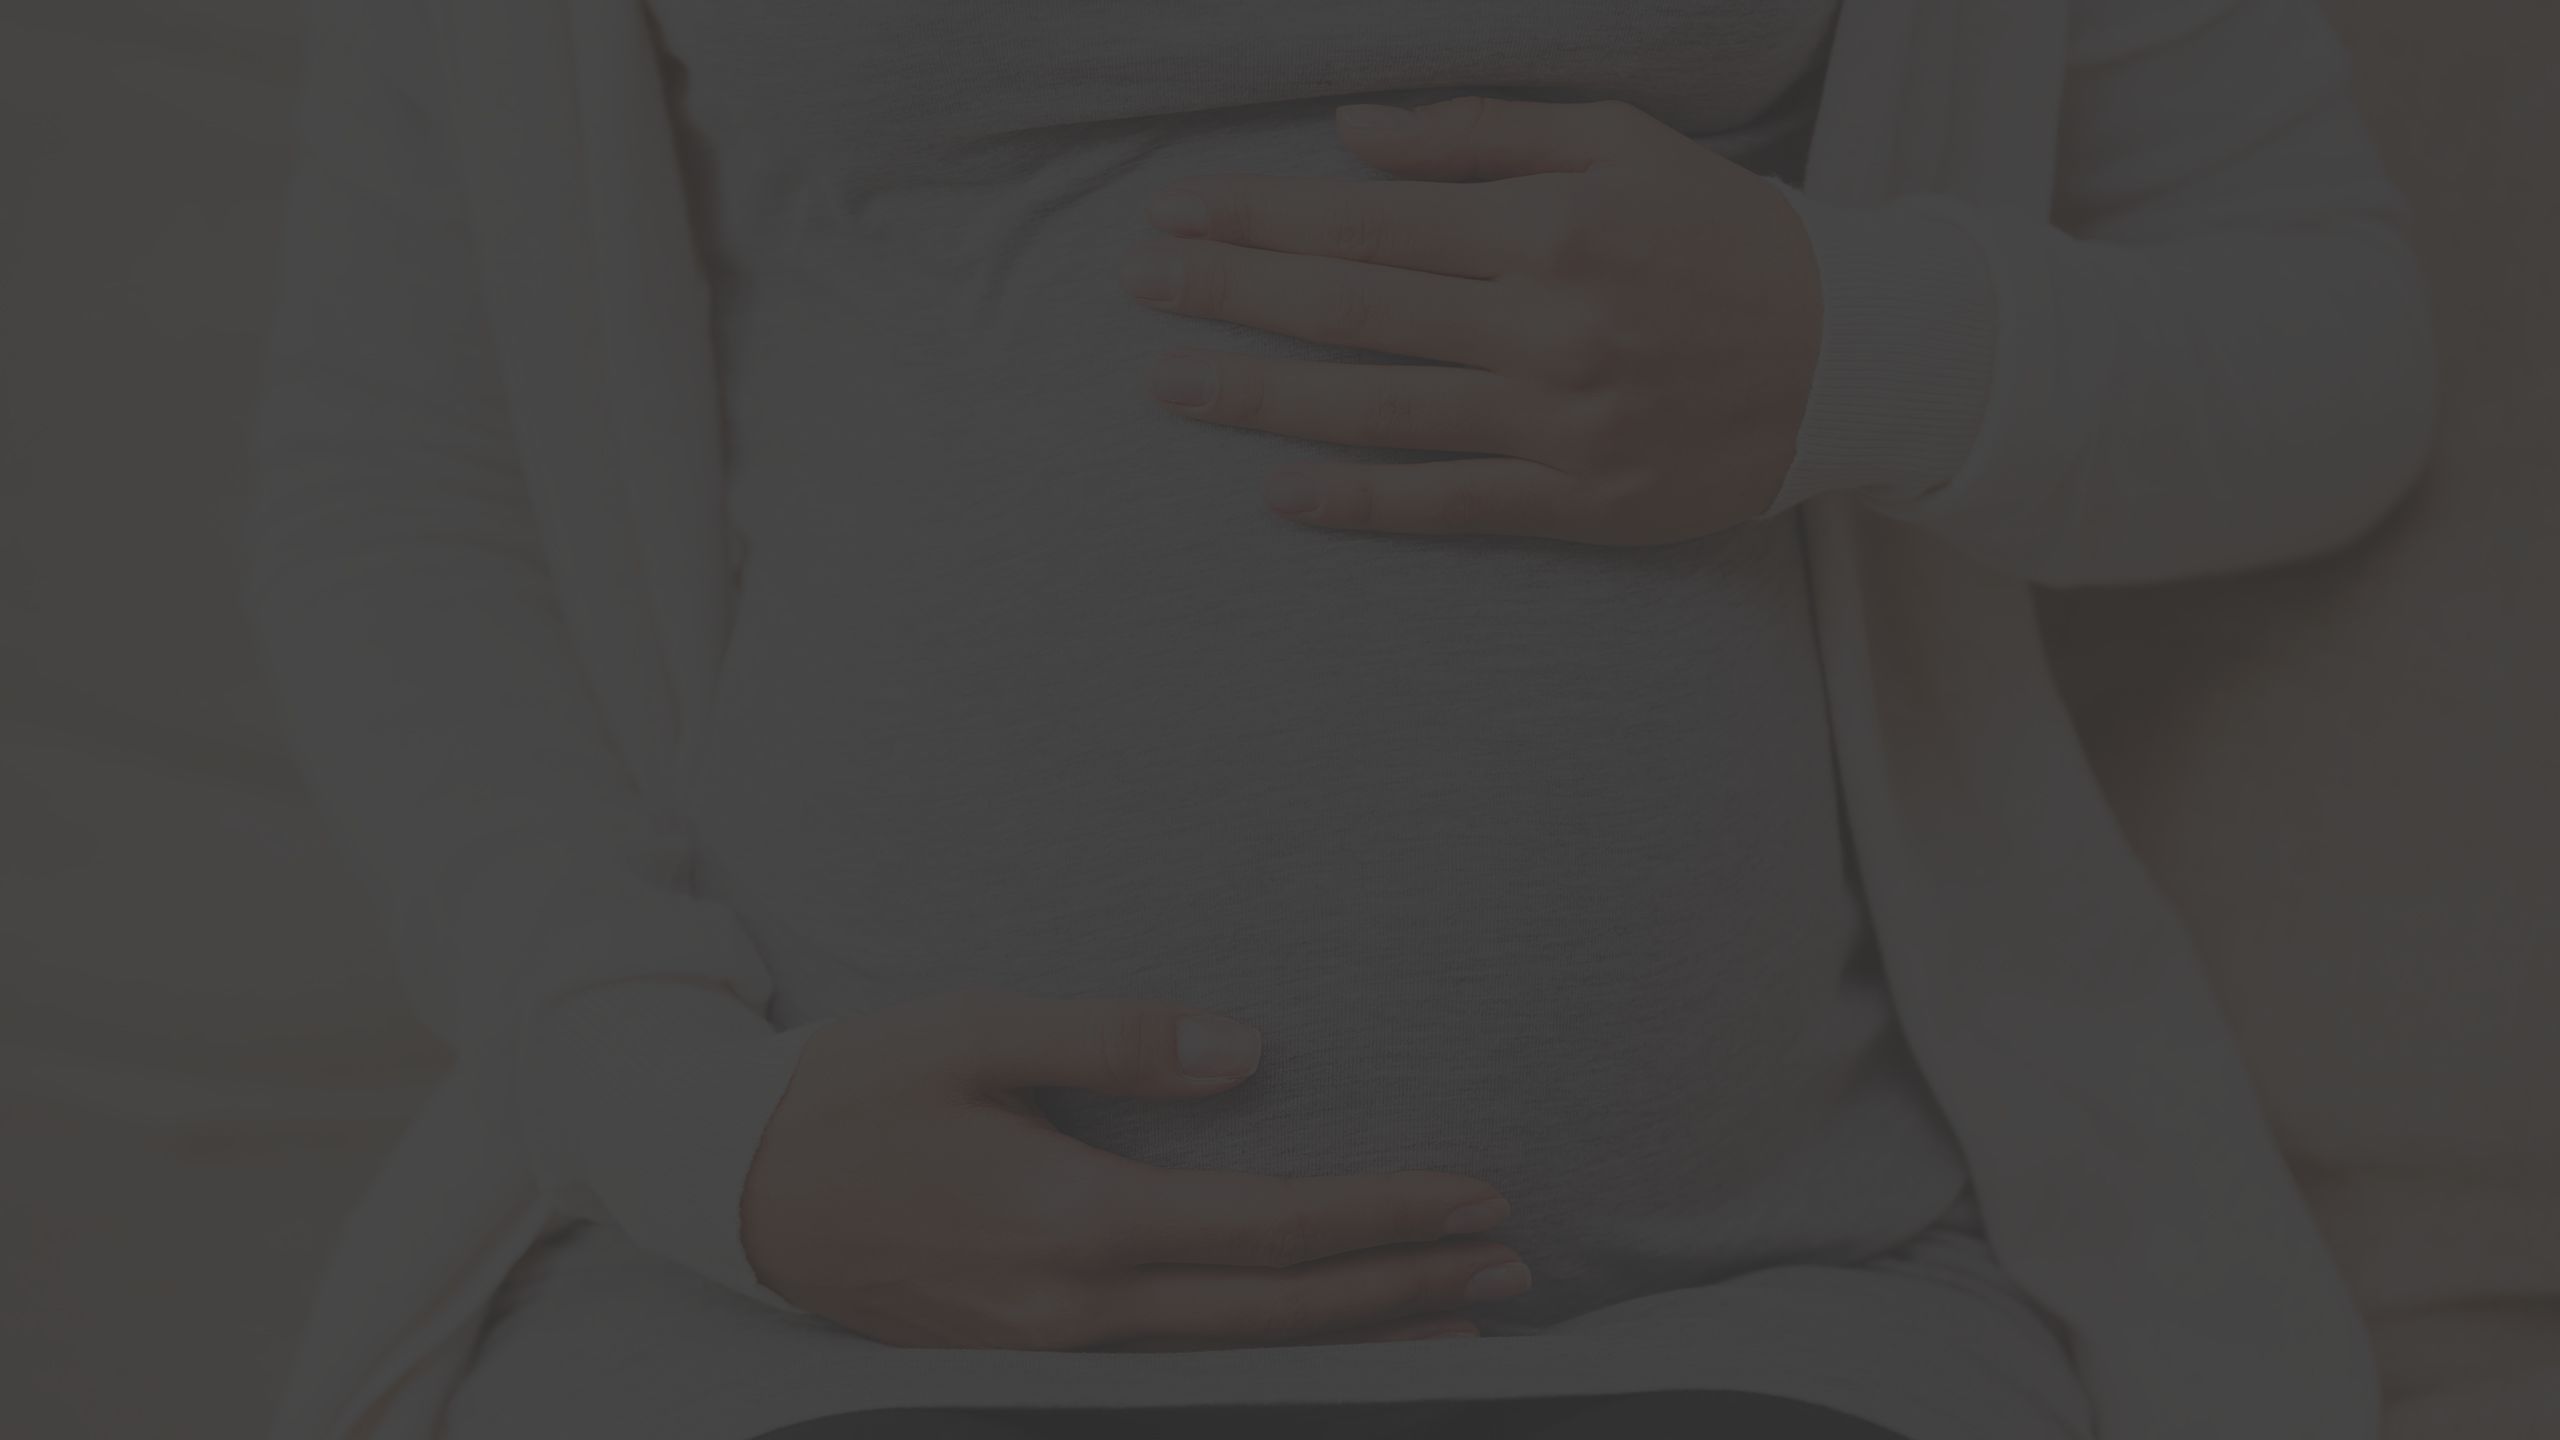 pregnant person dressed in a light gray shirt and cream colored sweater, sitting down and holding their belly